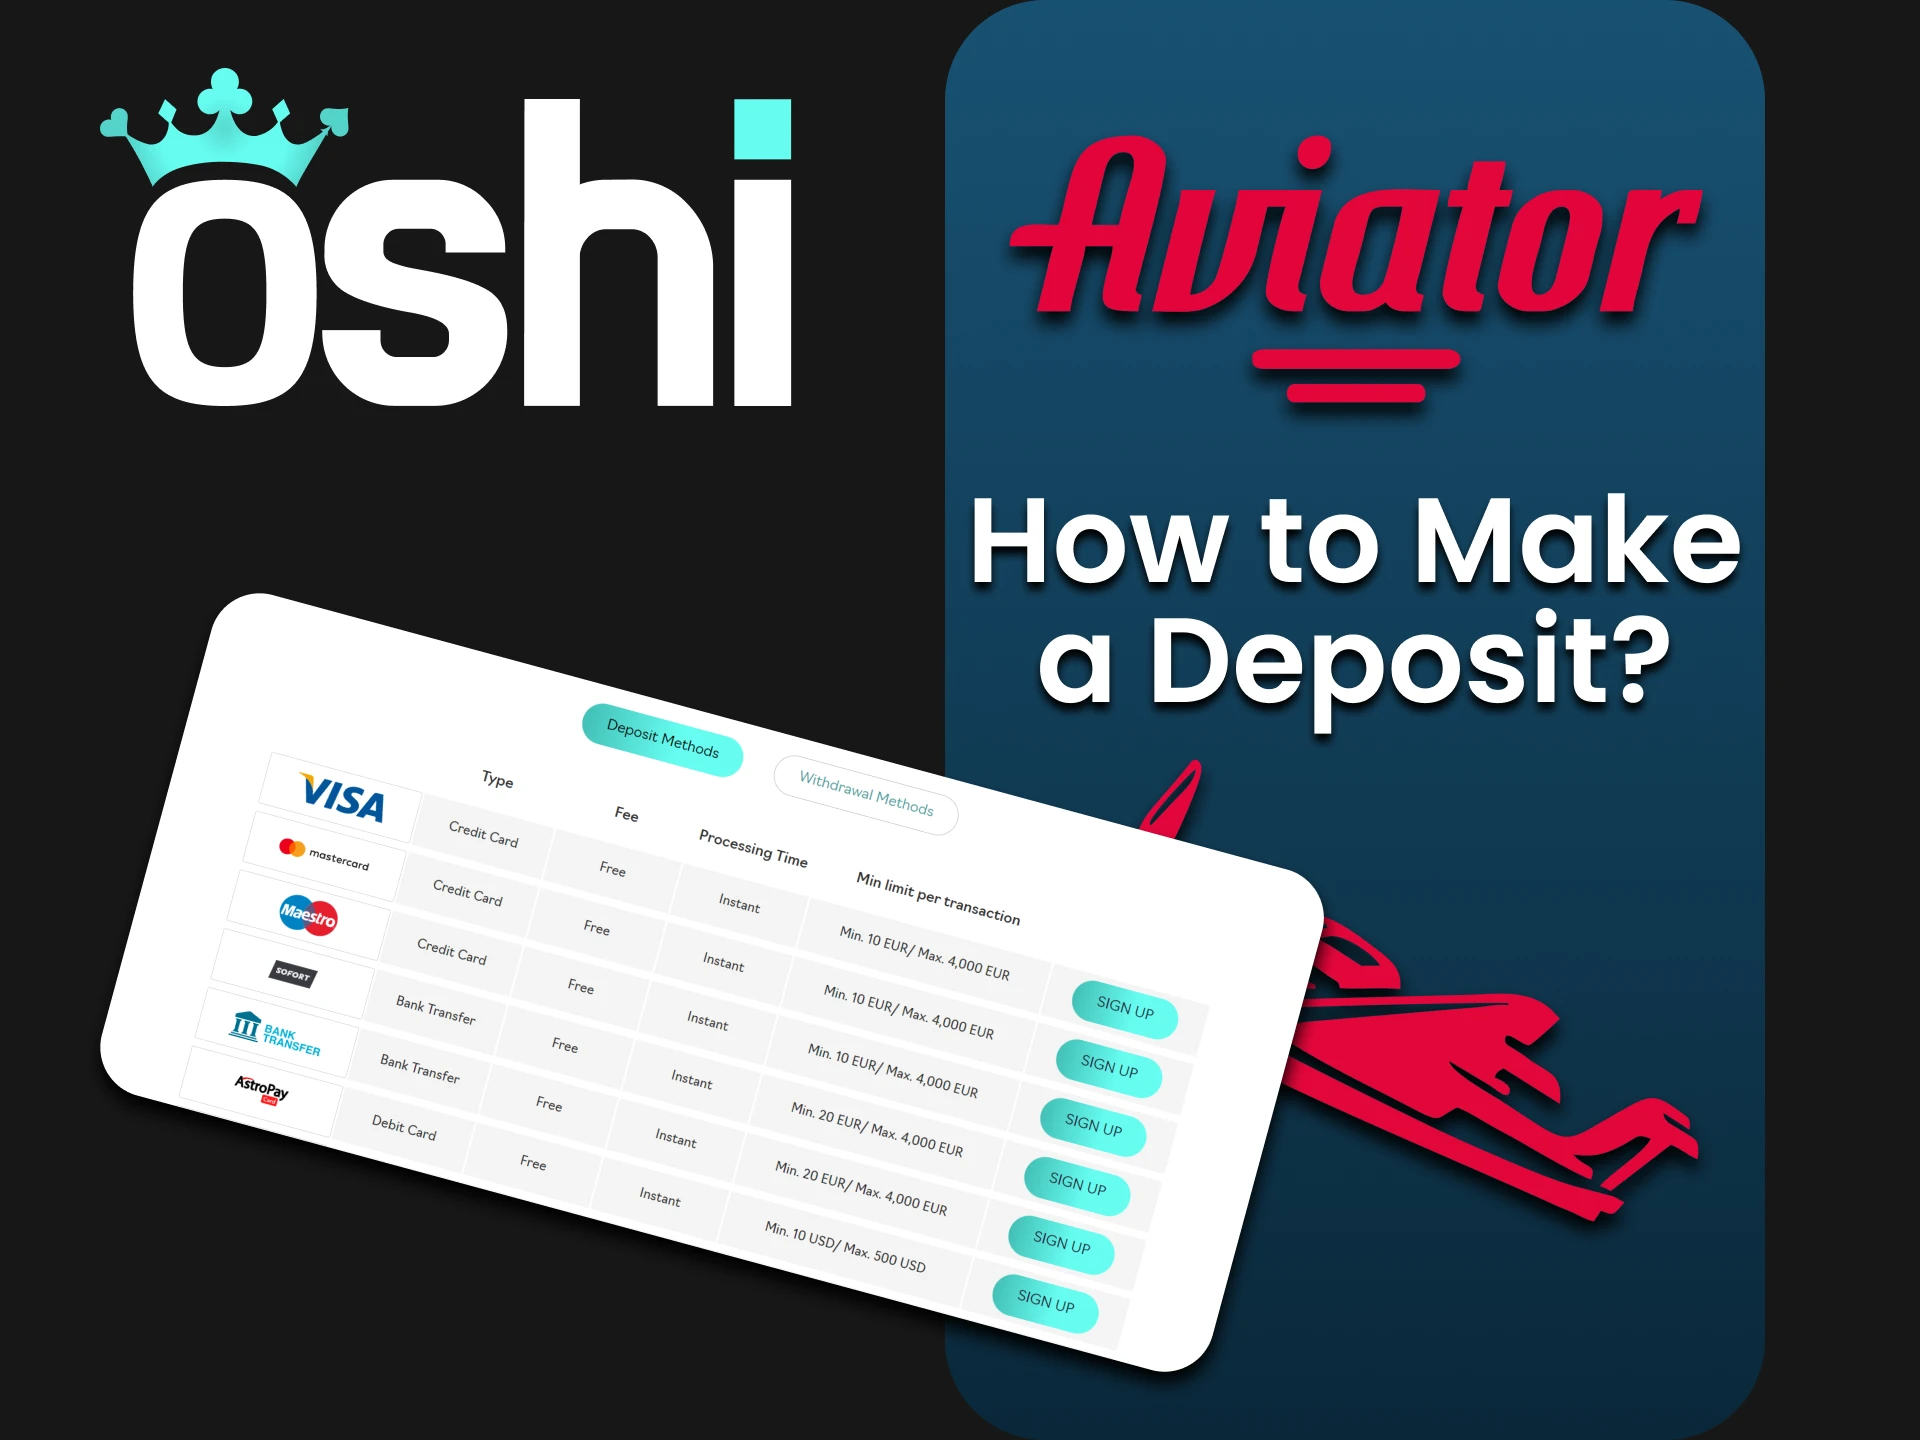 We will tell you about ways to top up funds at Oshi Casino for Aviator.